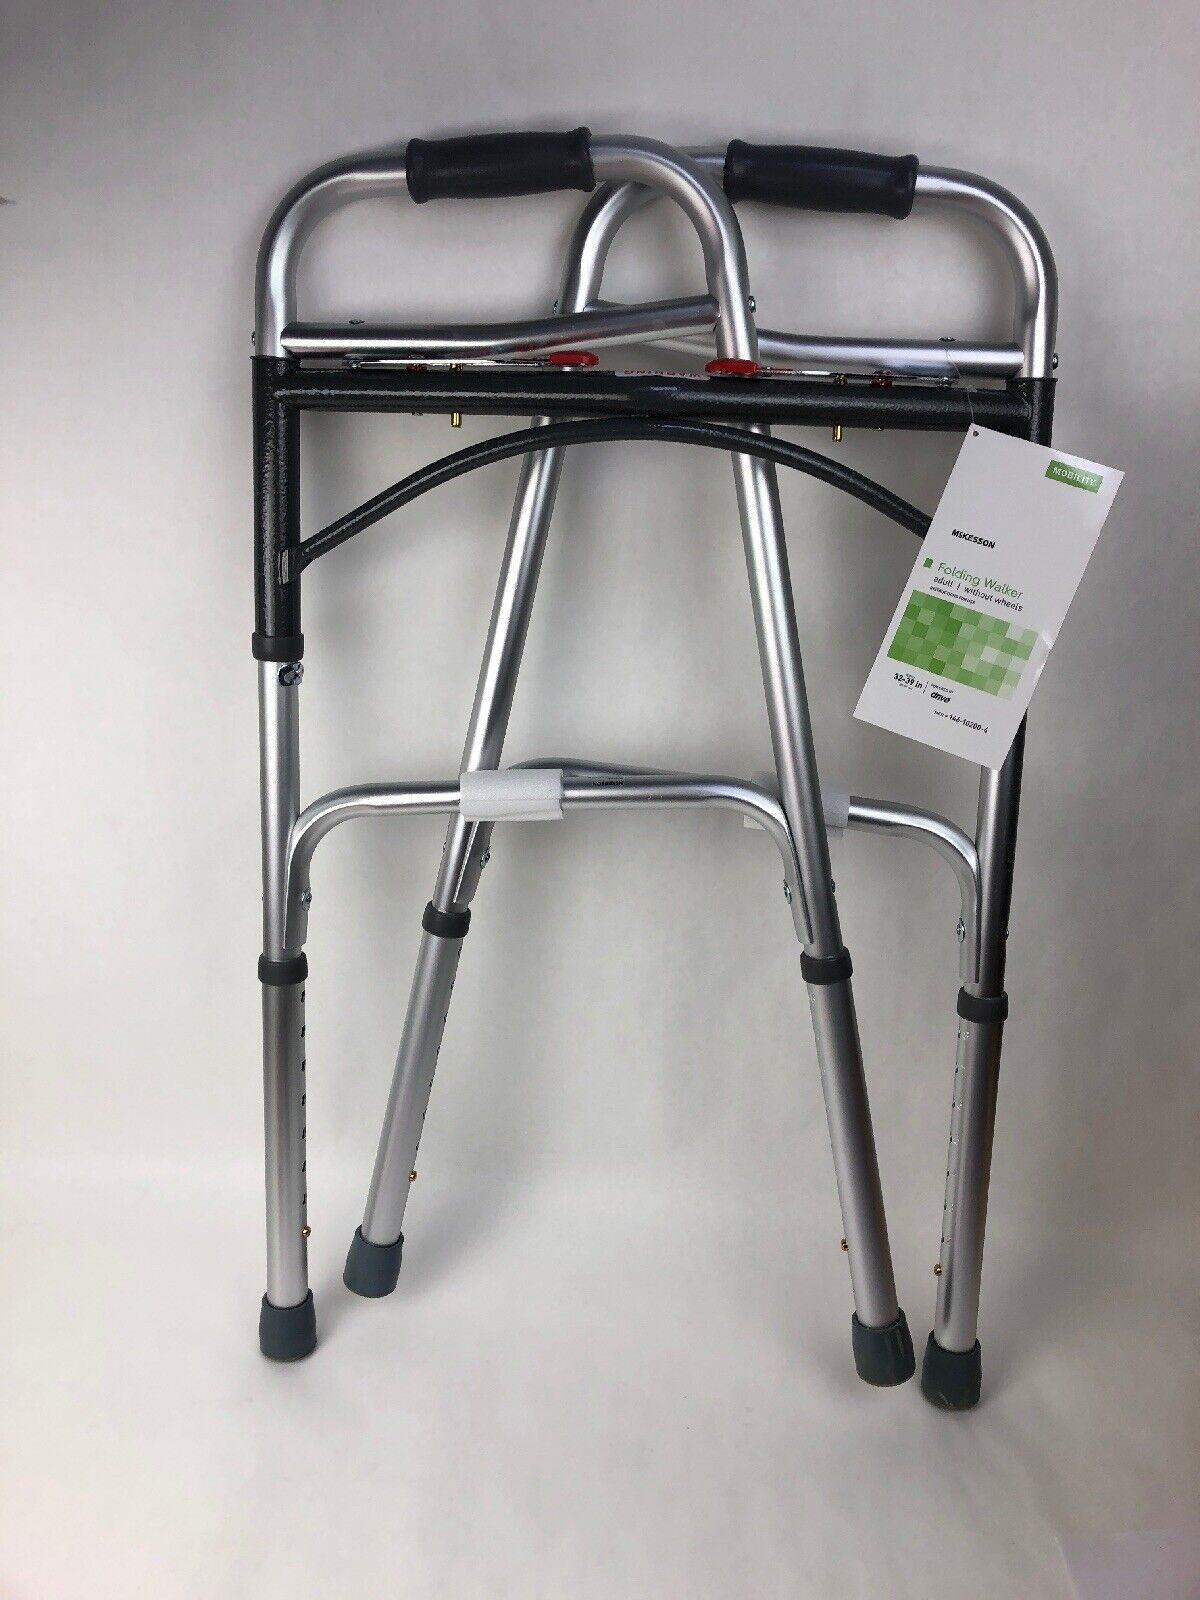 McKesson Drive Medical Two Button Folding Walker For Senior Brand New - $30.00